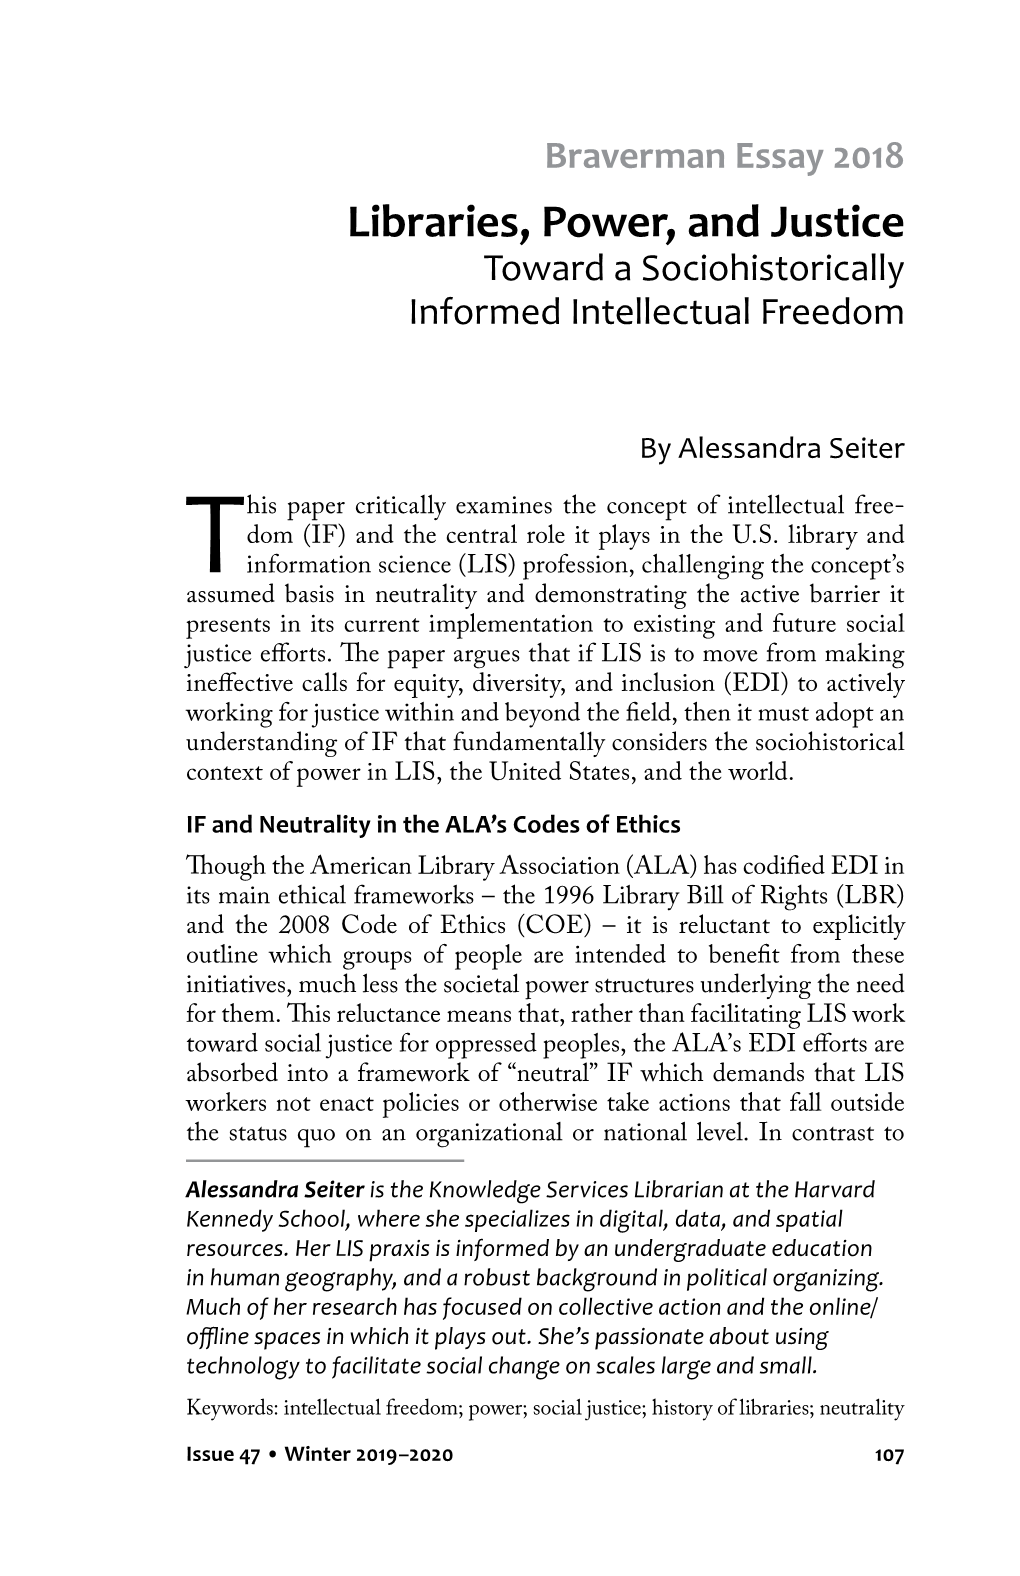 Libraries, Power, and Justice Toward a Sociohistorically Informed Intellectual Freedom